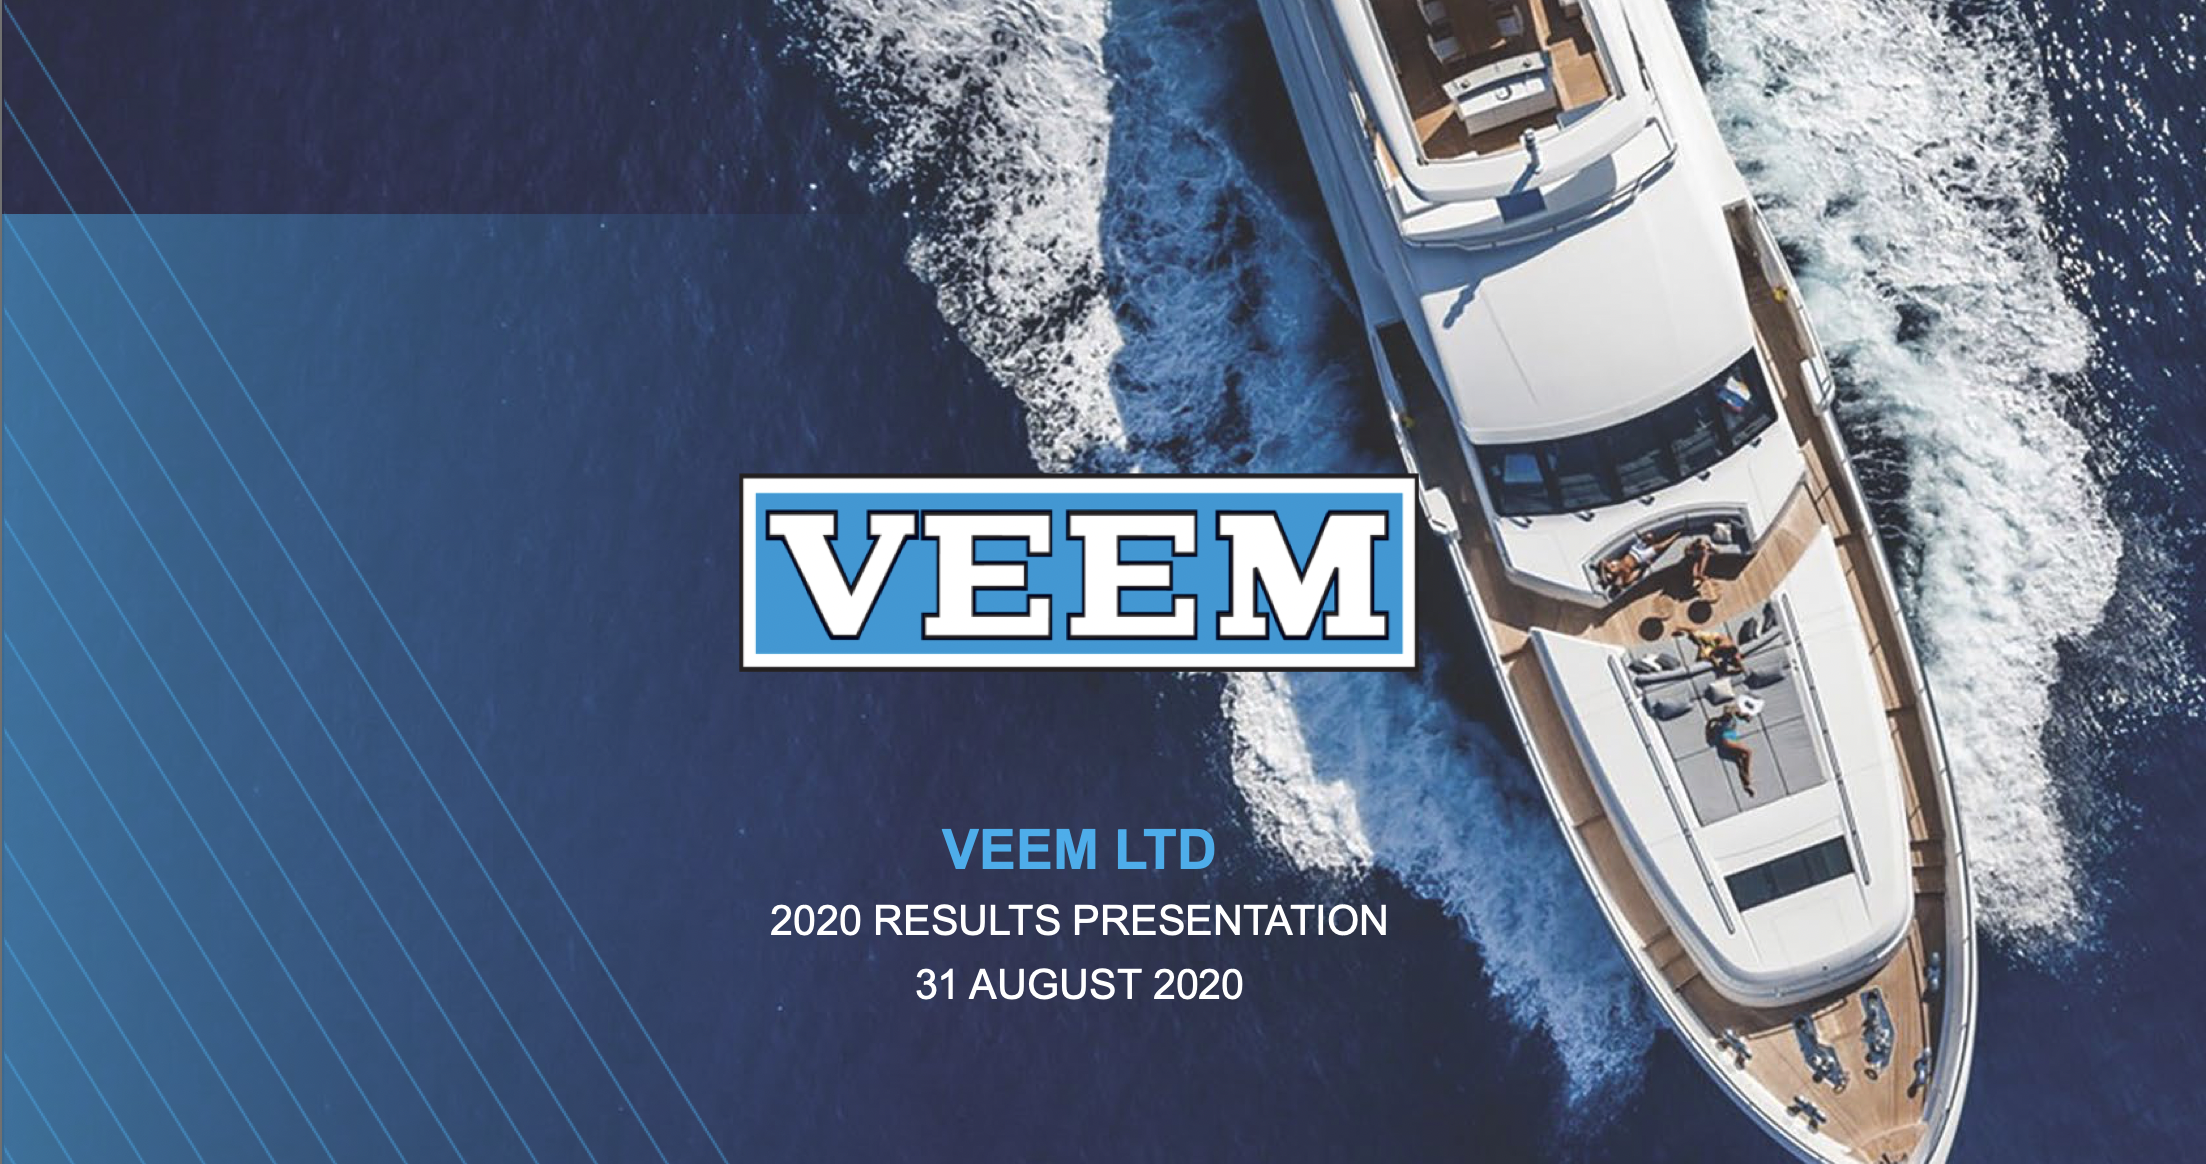 VEEM releases full year results and dividend